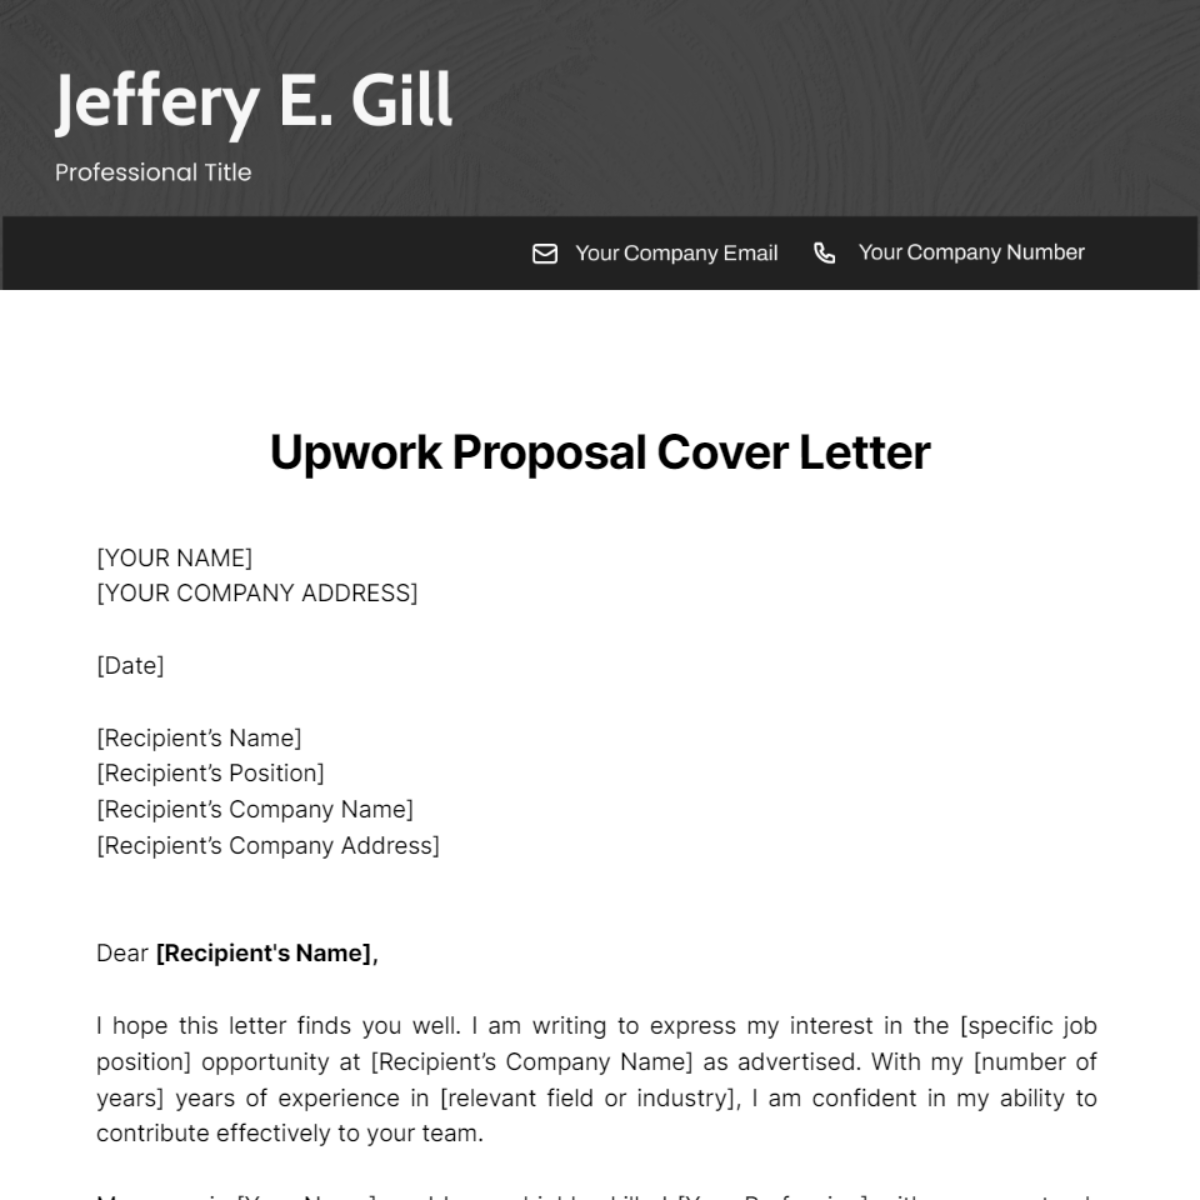 Upwork Proposal Cover Letter Template